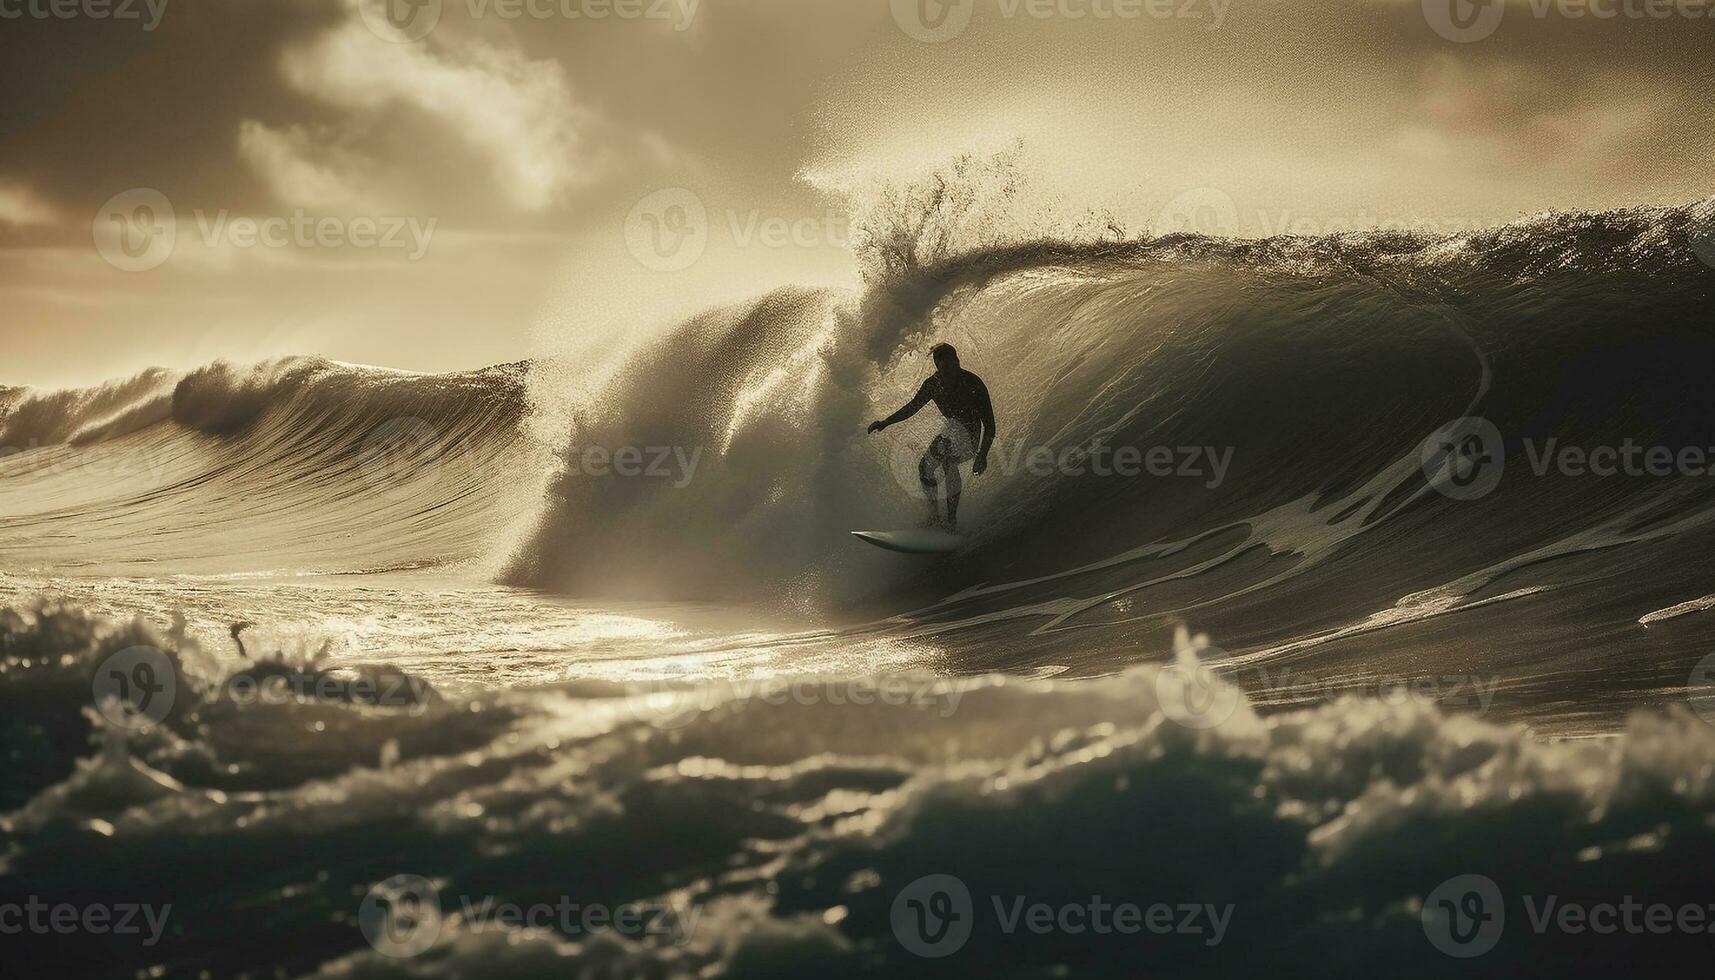 Sun kissed athlete rides pipeline wave in tropical Bali paradise generated by AI photo